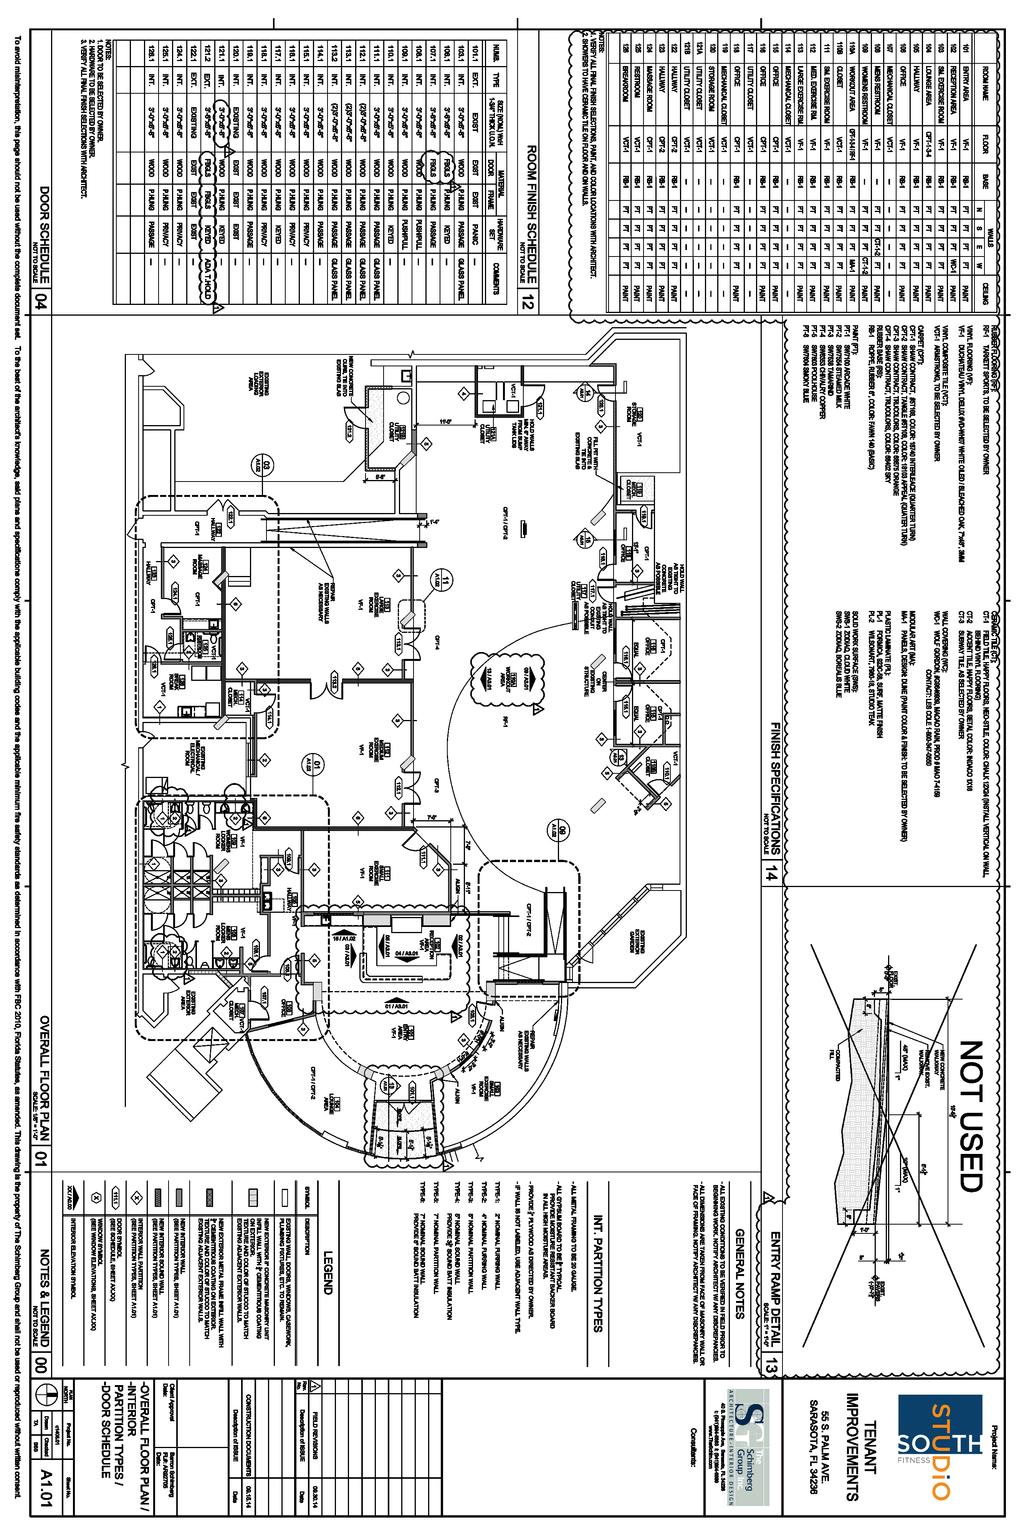 Retail Property For Lease Floor Plan